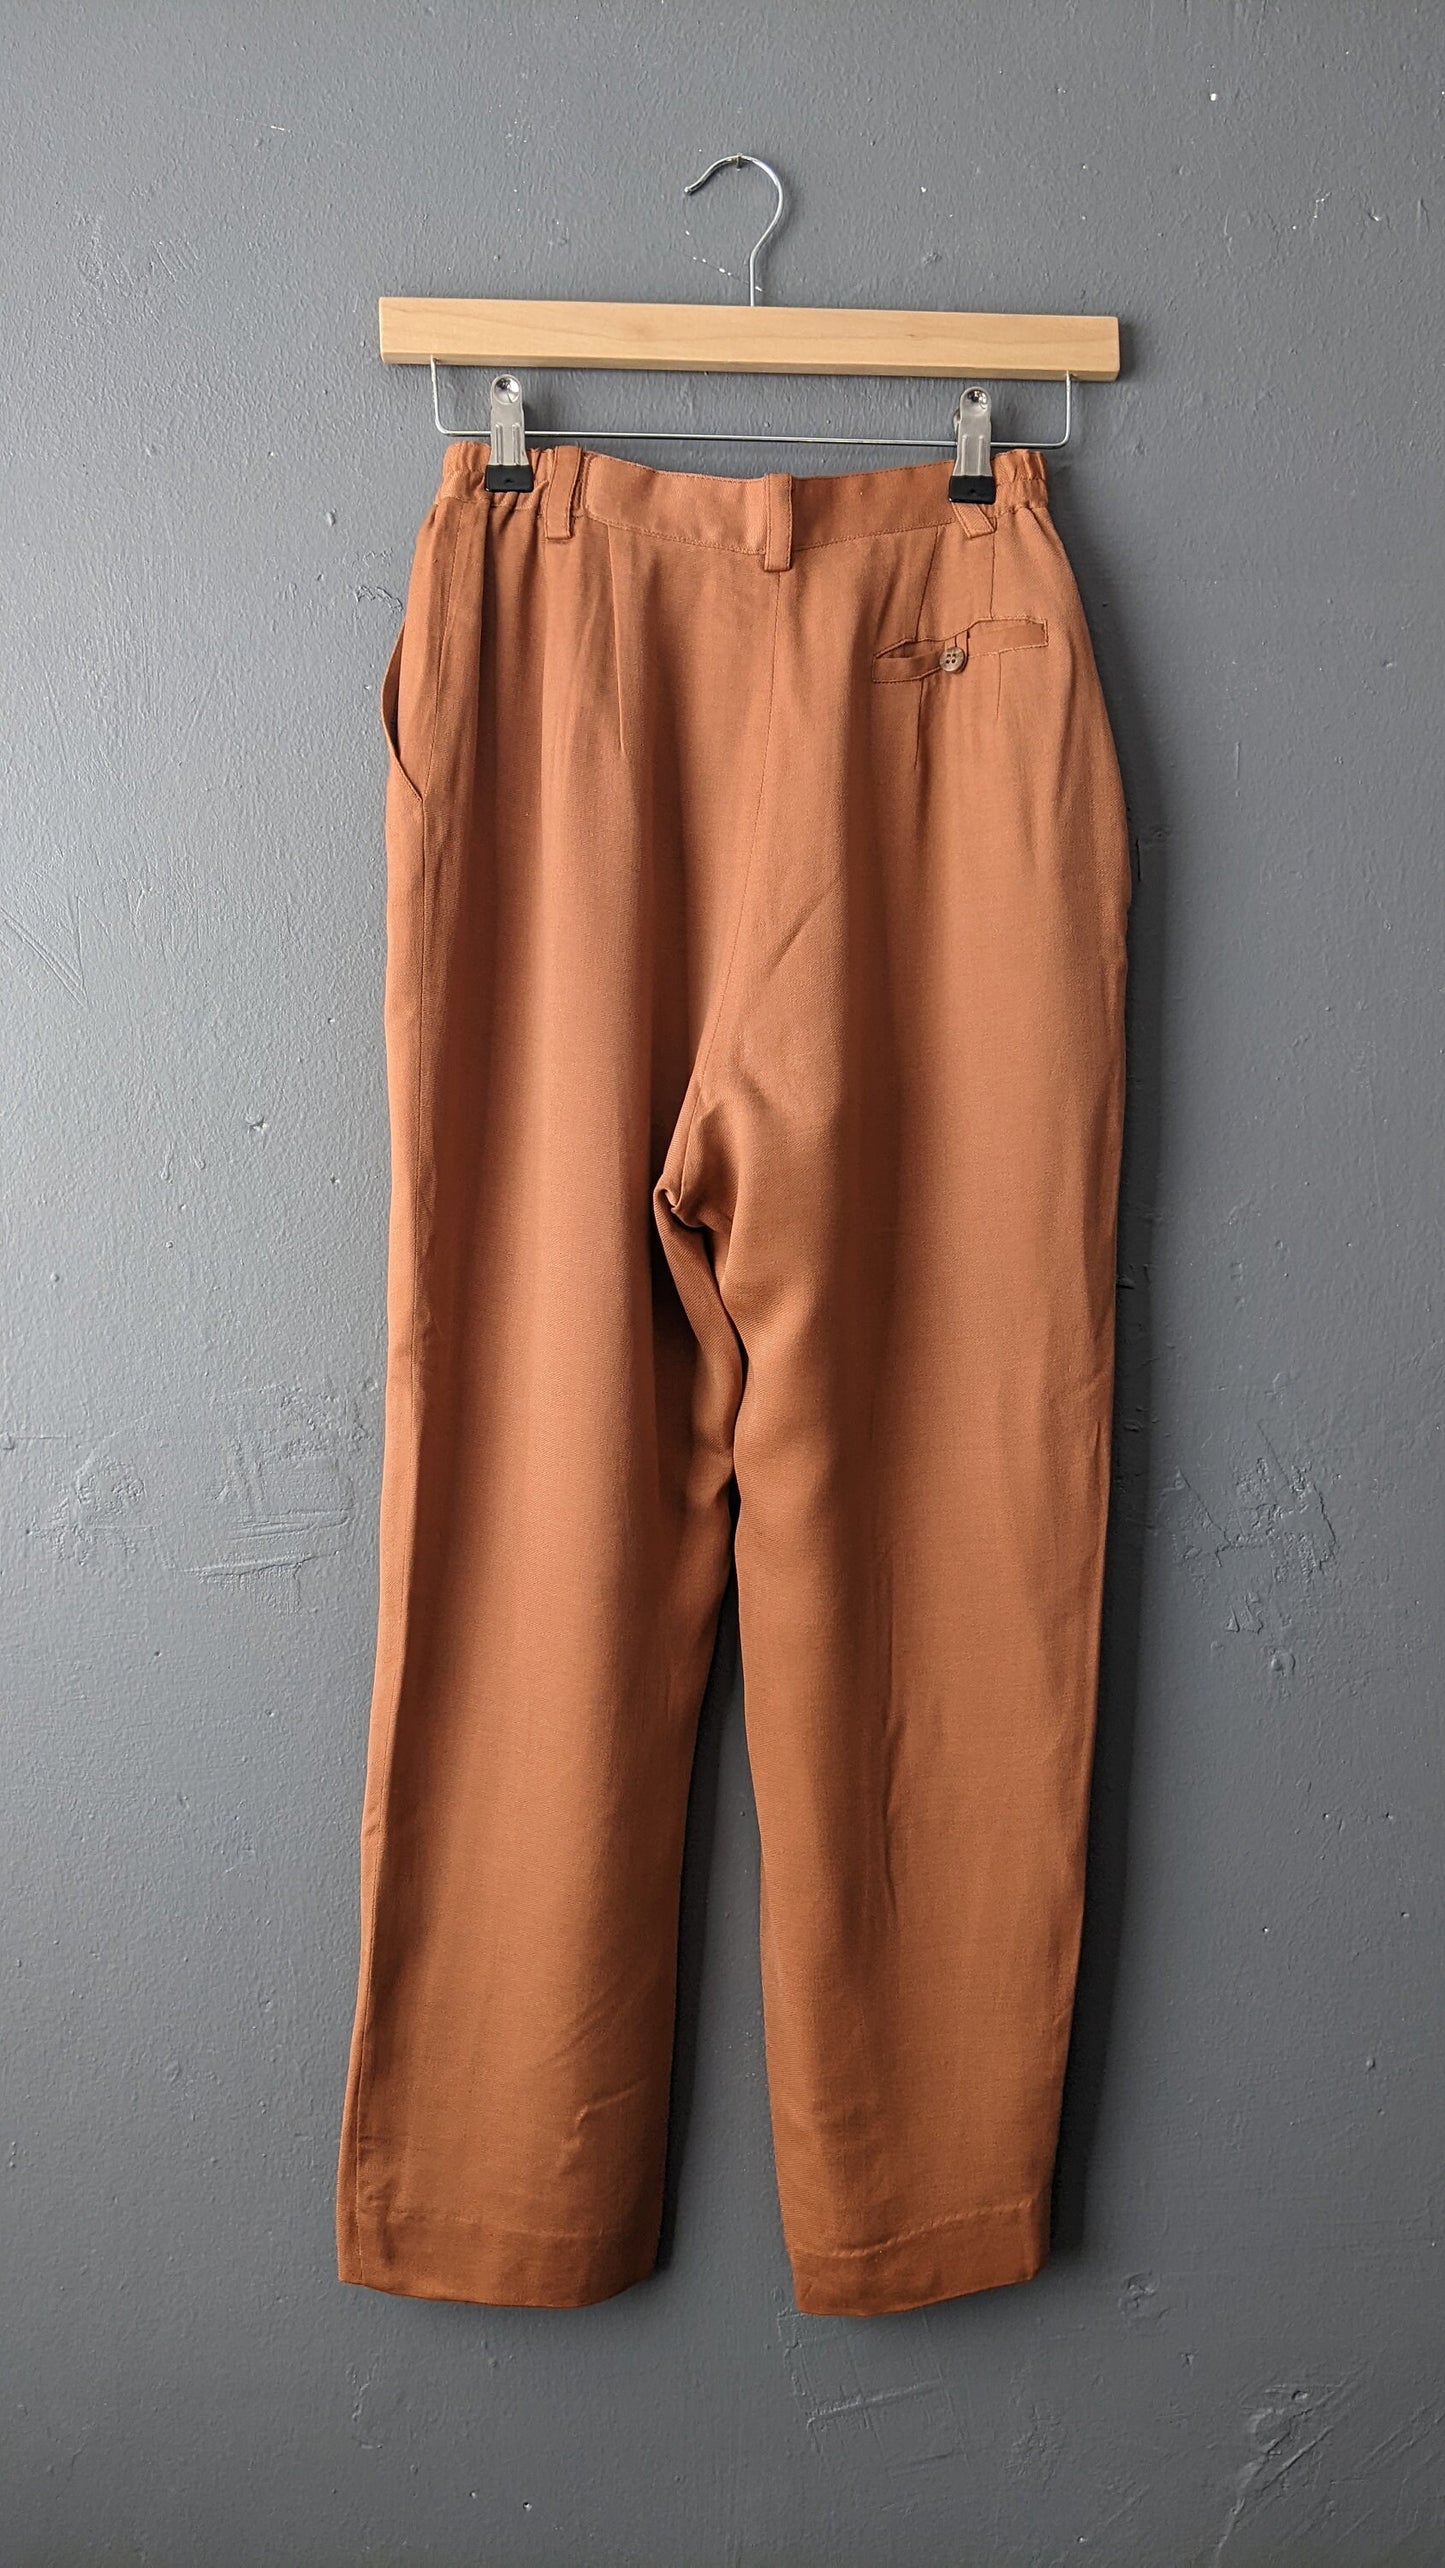 90s Terracotta Pleat Front Trousers, Tapered Fit, Size Short Petite